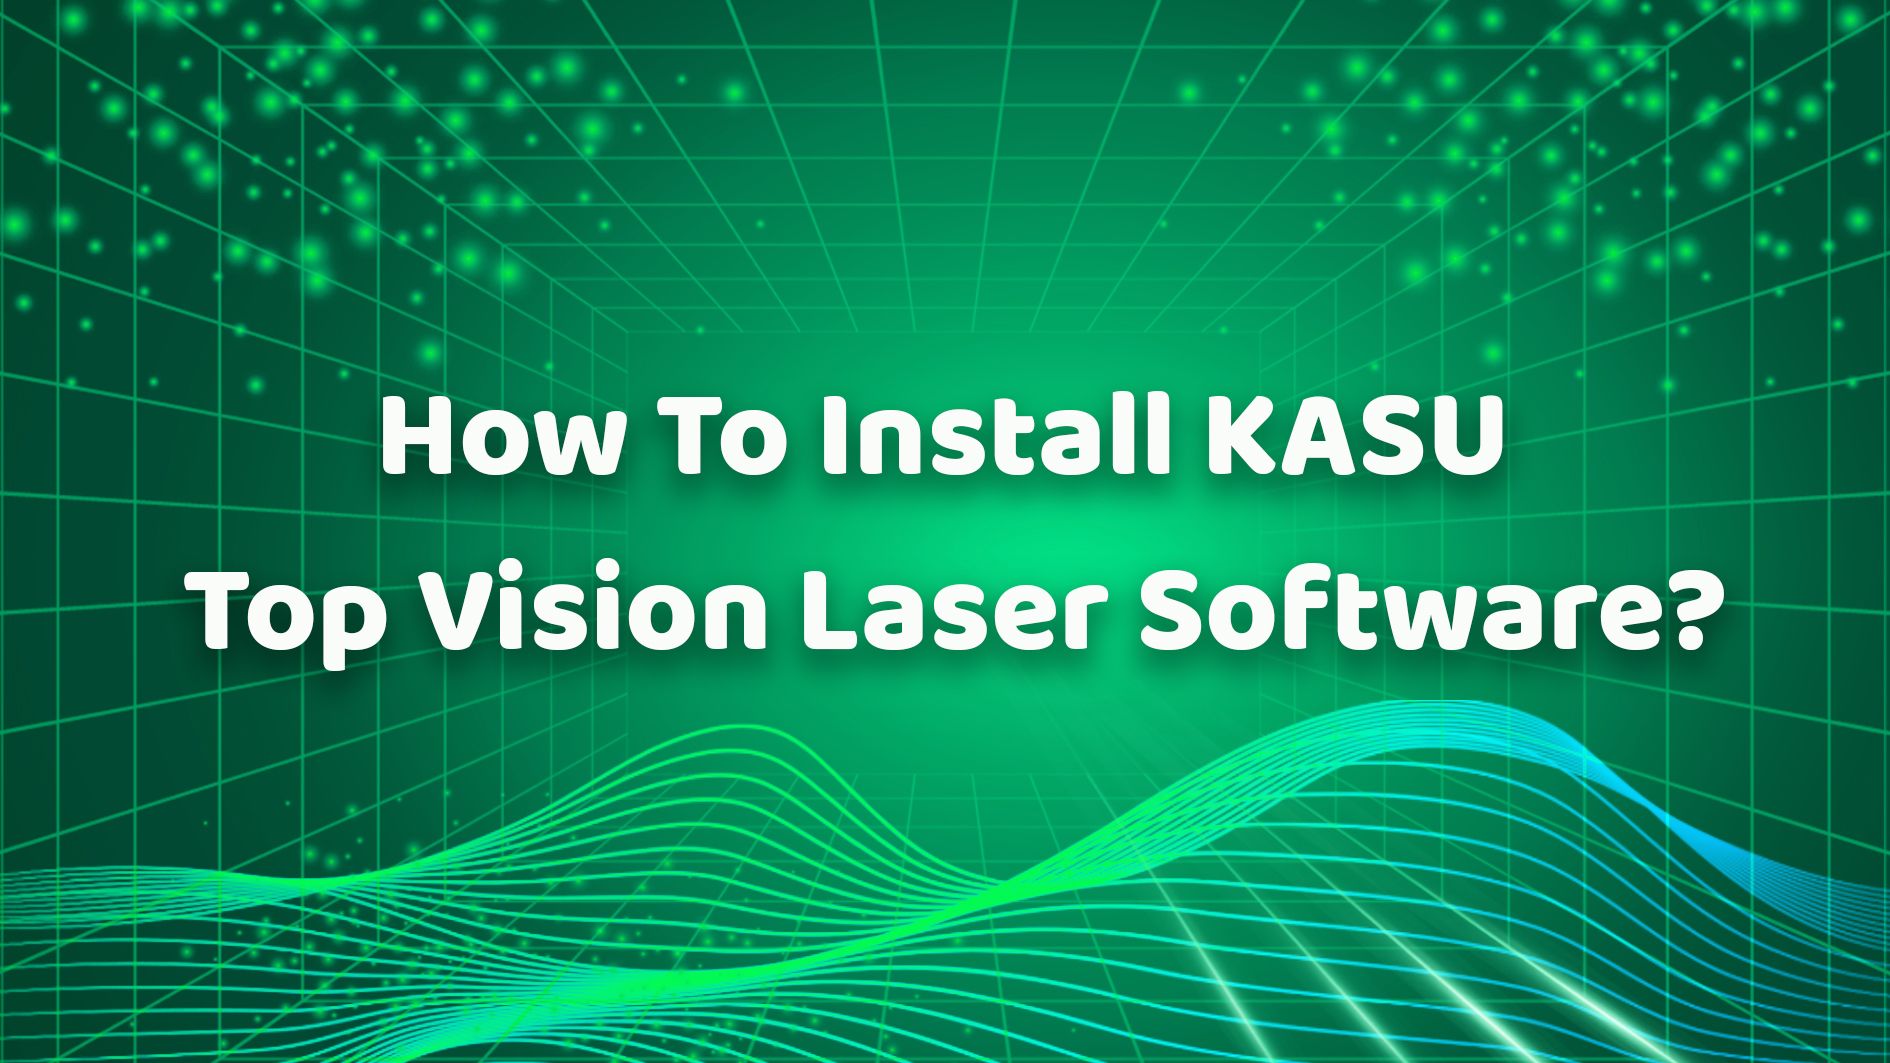 How To Install KASU Top Vision Laser Software？